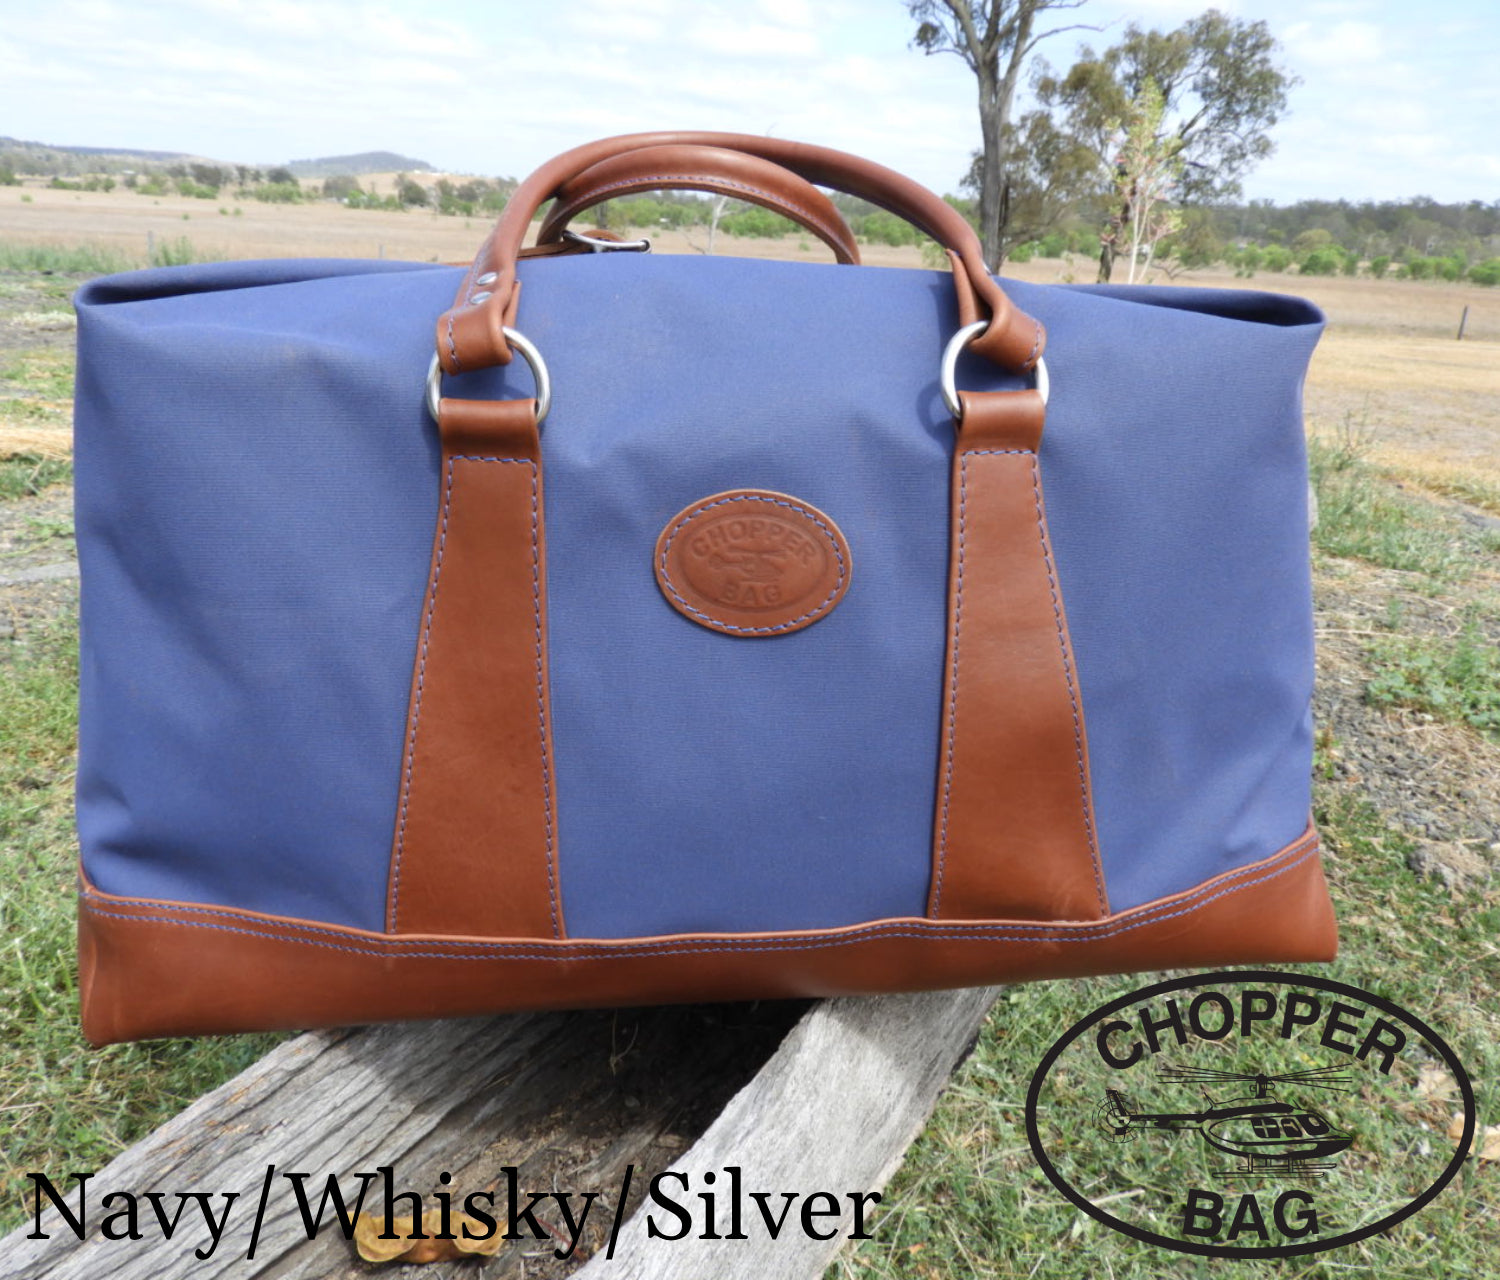 Chopper Bag - Product for Personalisation